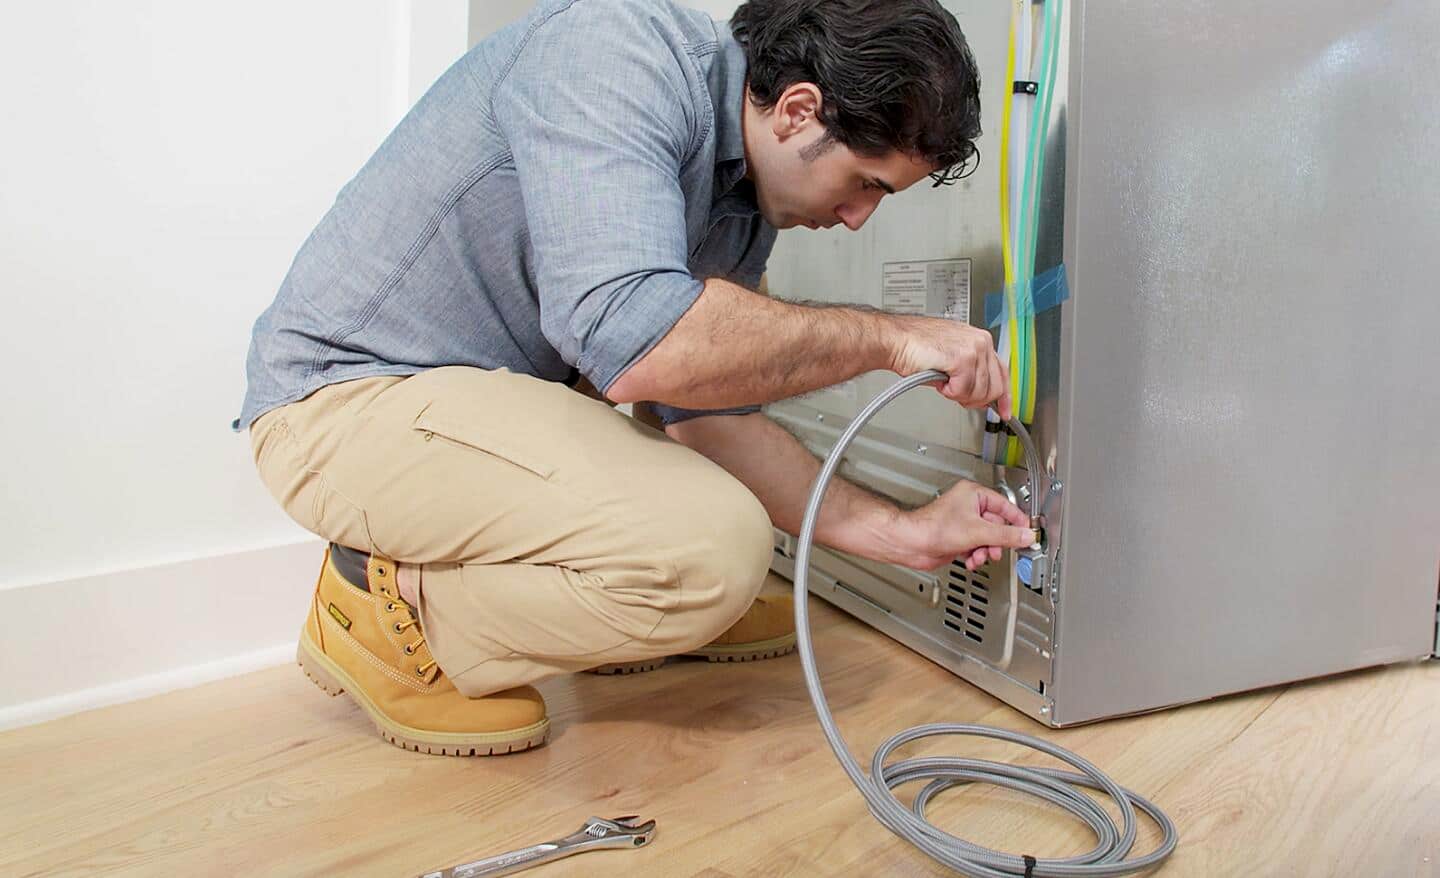 A person connecting a water line to a refrigerator.